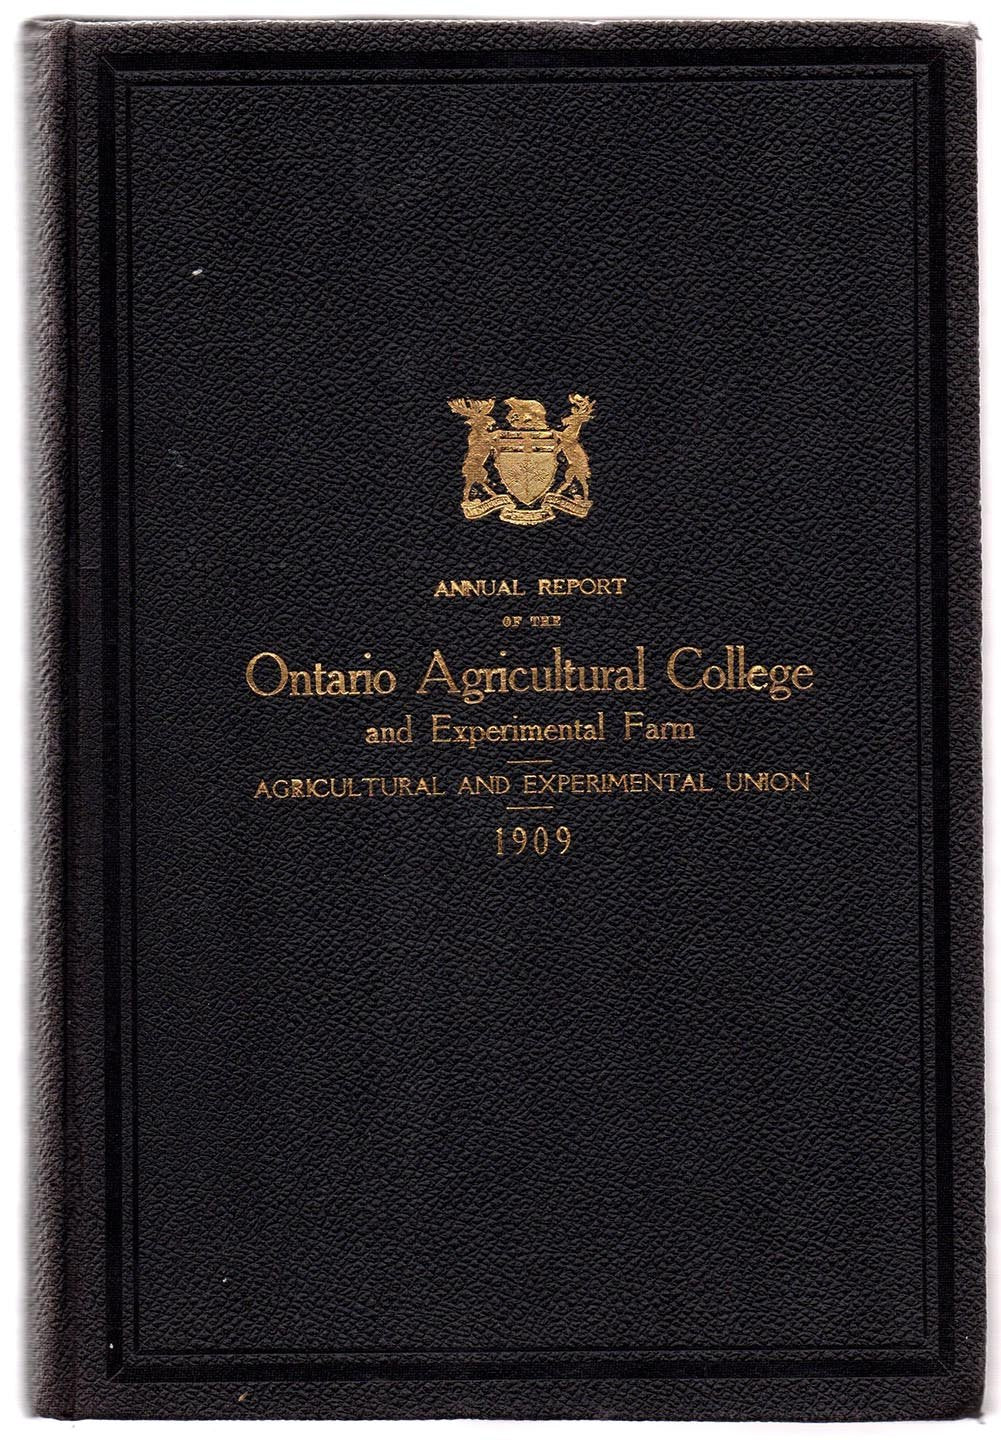 Thirty-fifth Annual Report of the Ontario Agricultural College and Experimental Farm 1909; Thirty-first Annual Report of the Agricultural and Experimental Union 1909